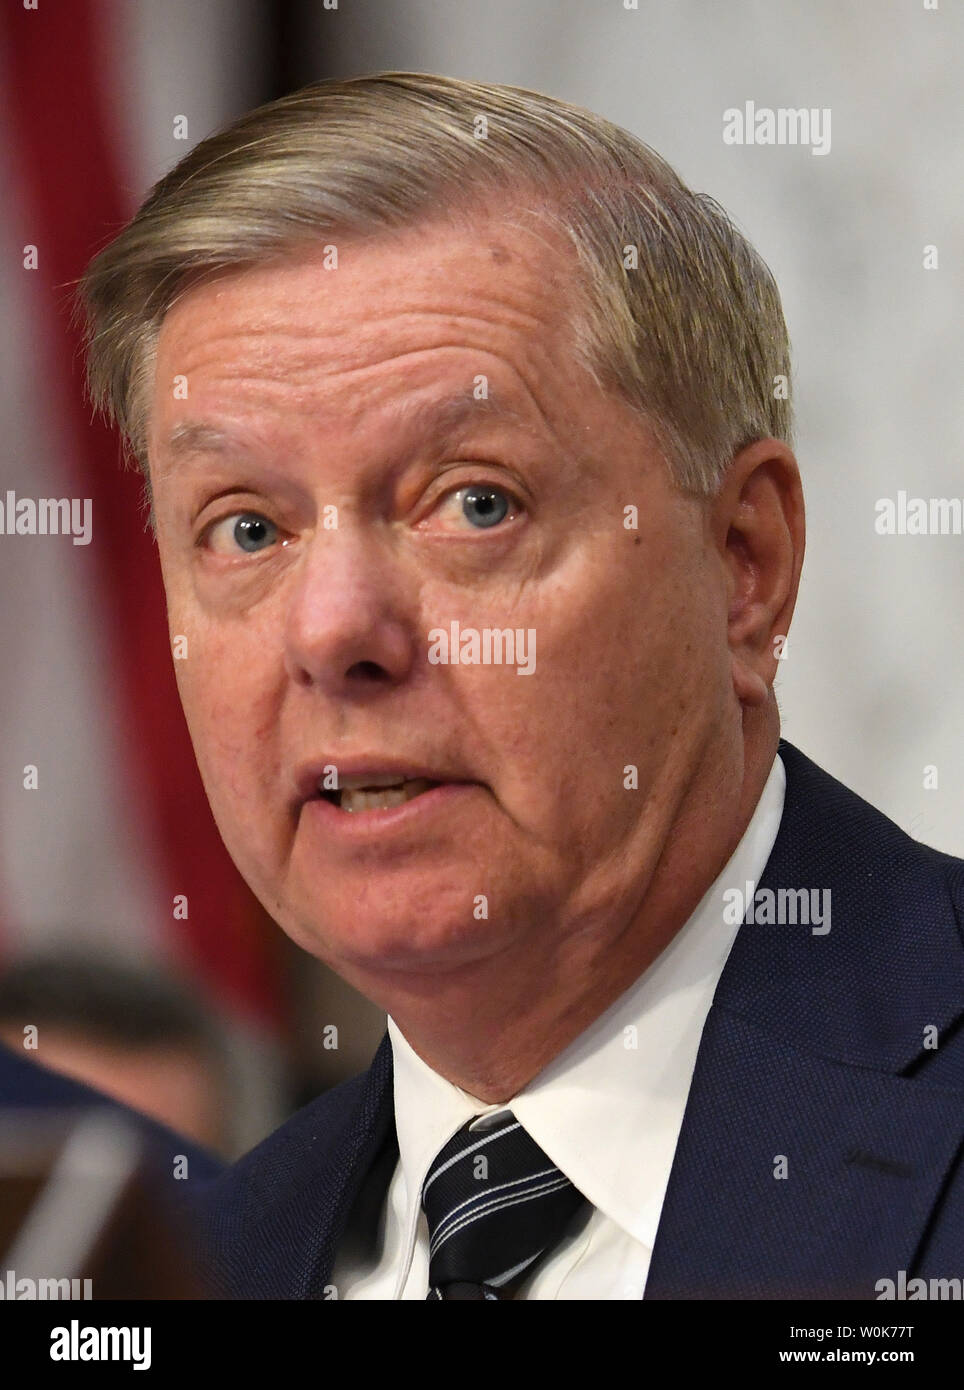 Sen. Lindsey Graham, R-S.C., delivers his opening statement during the Judiciary Committee confirmation hearing for Supreme Court Justice nominee Brett M. Kavanaugh on Capitol Hill in Washington, DC on September 4, 2018. Judge Kavanaugh was nominated to fill the seat of Justice Anthony M. Kennedy who announced his retirement in June.  Photo by Pat Benic/UPI Stock Photo